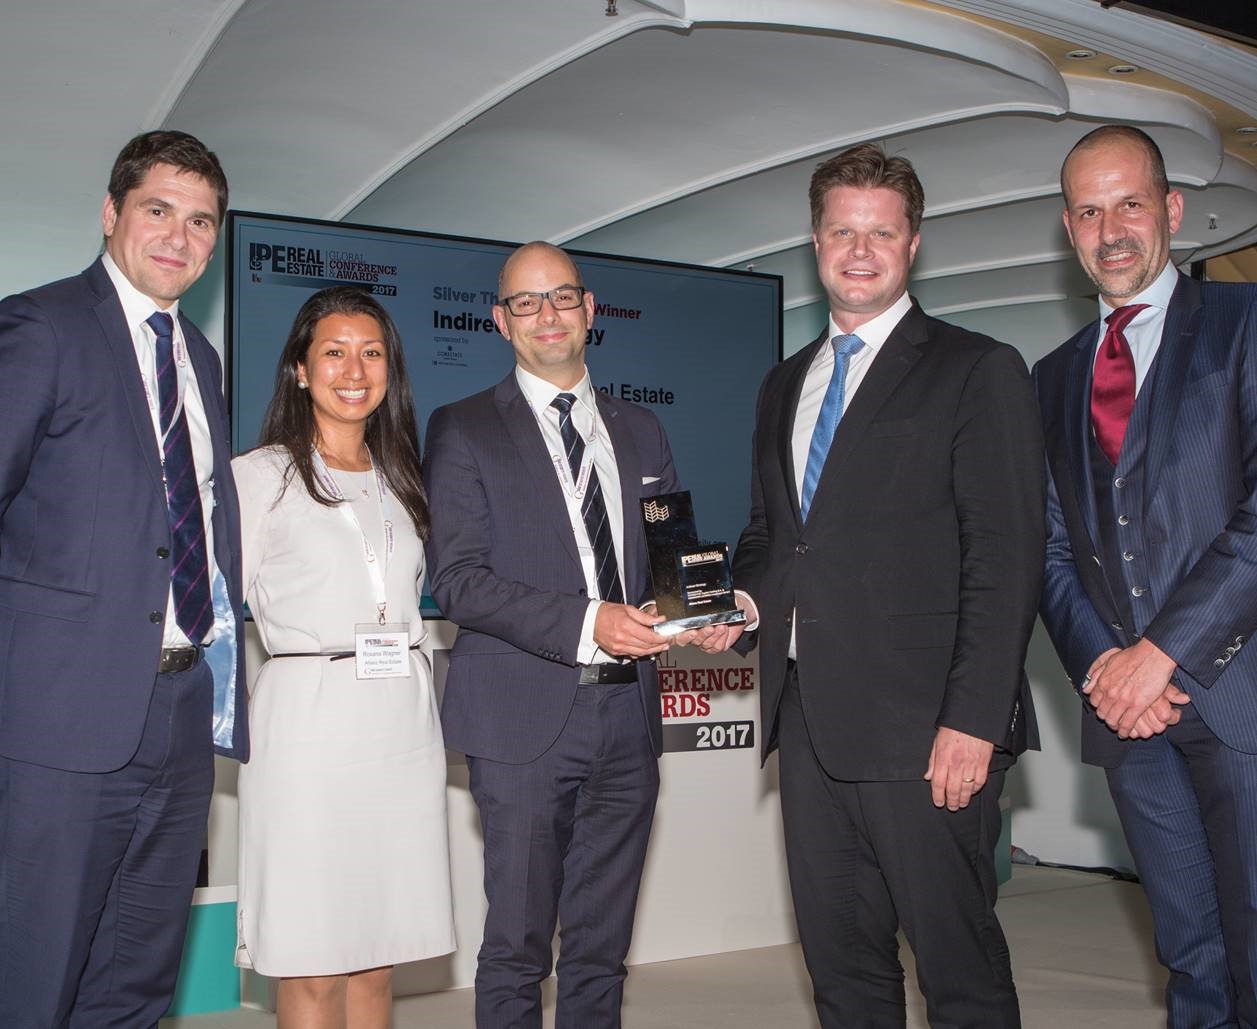 From left to right: Andrew Strachan, Roxana Wagner and Jerome Berenz from the Indirect Investment Team of ARE receiving the IPE Award for Indirect Strategy